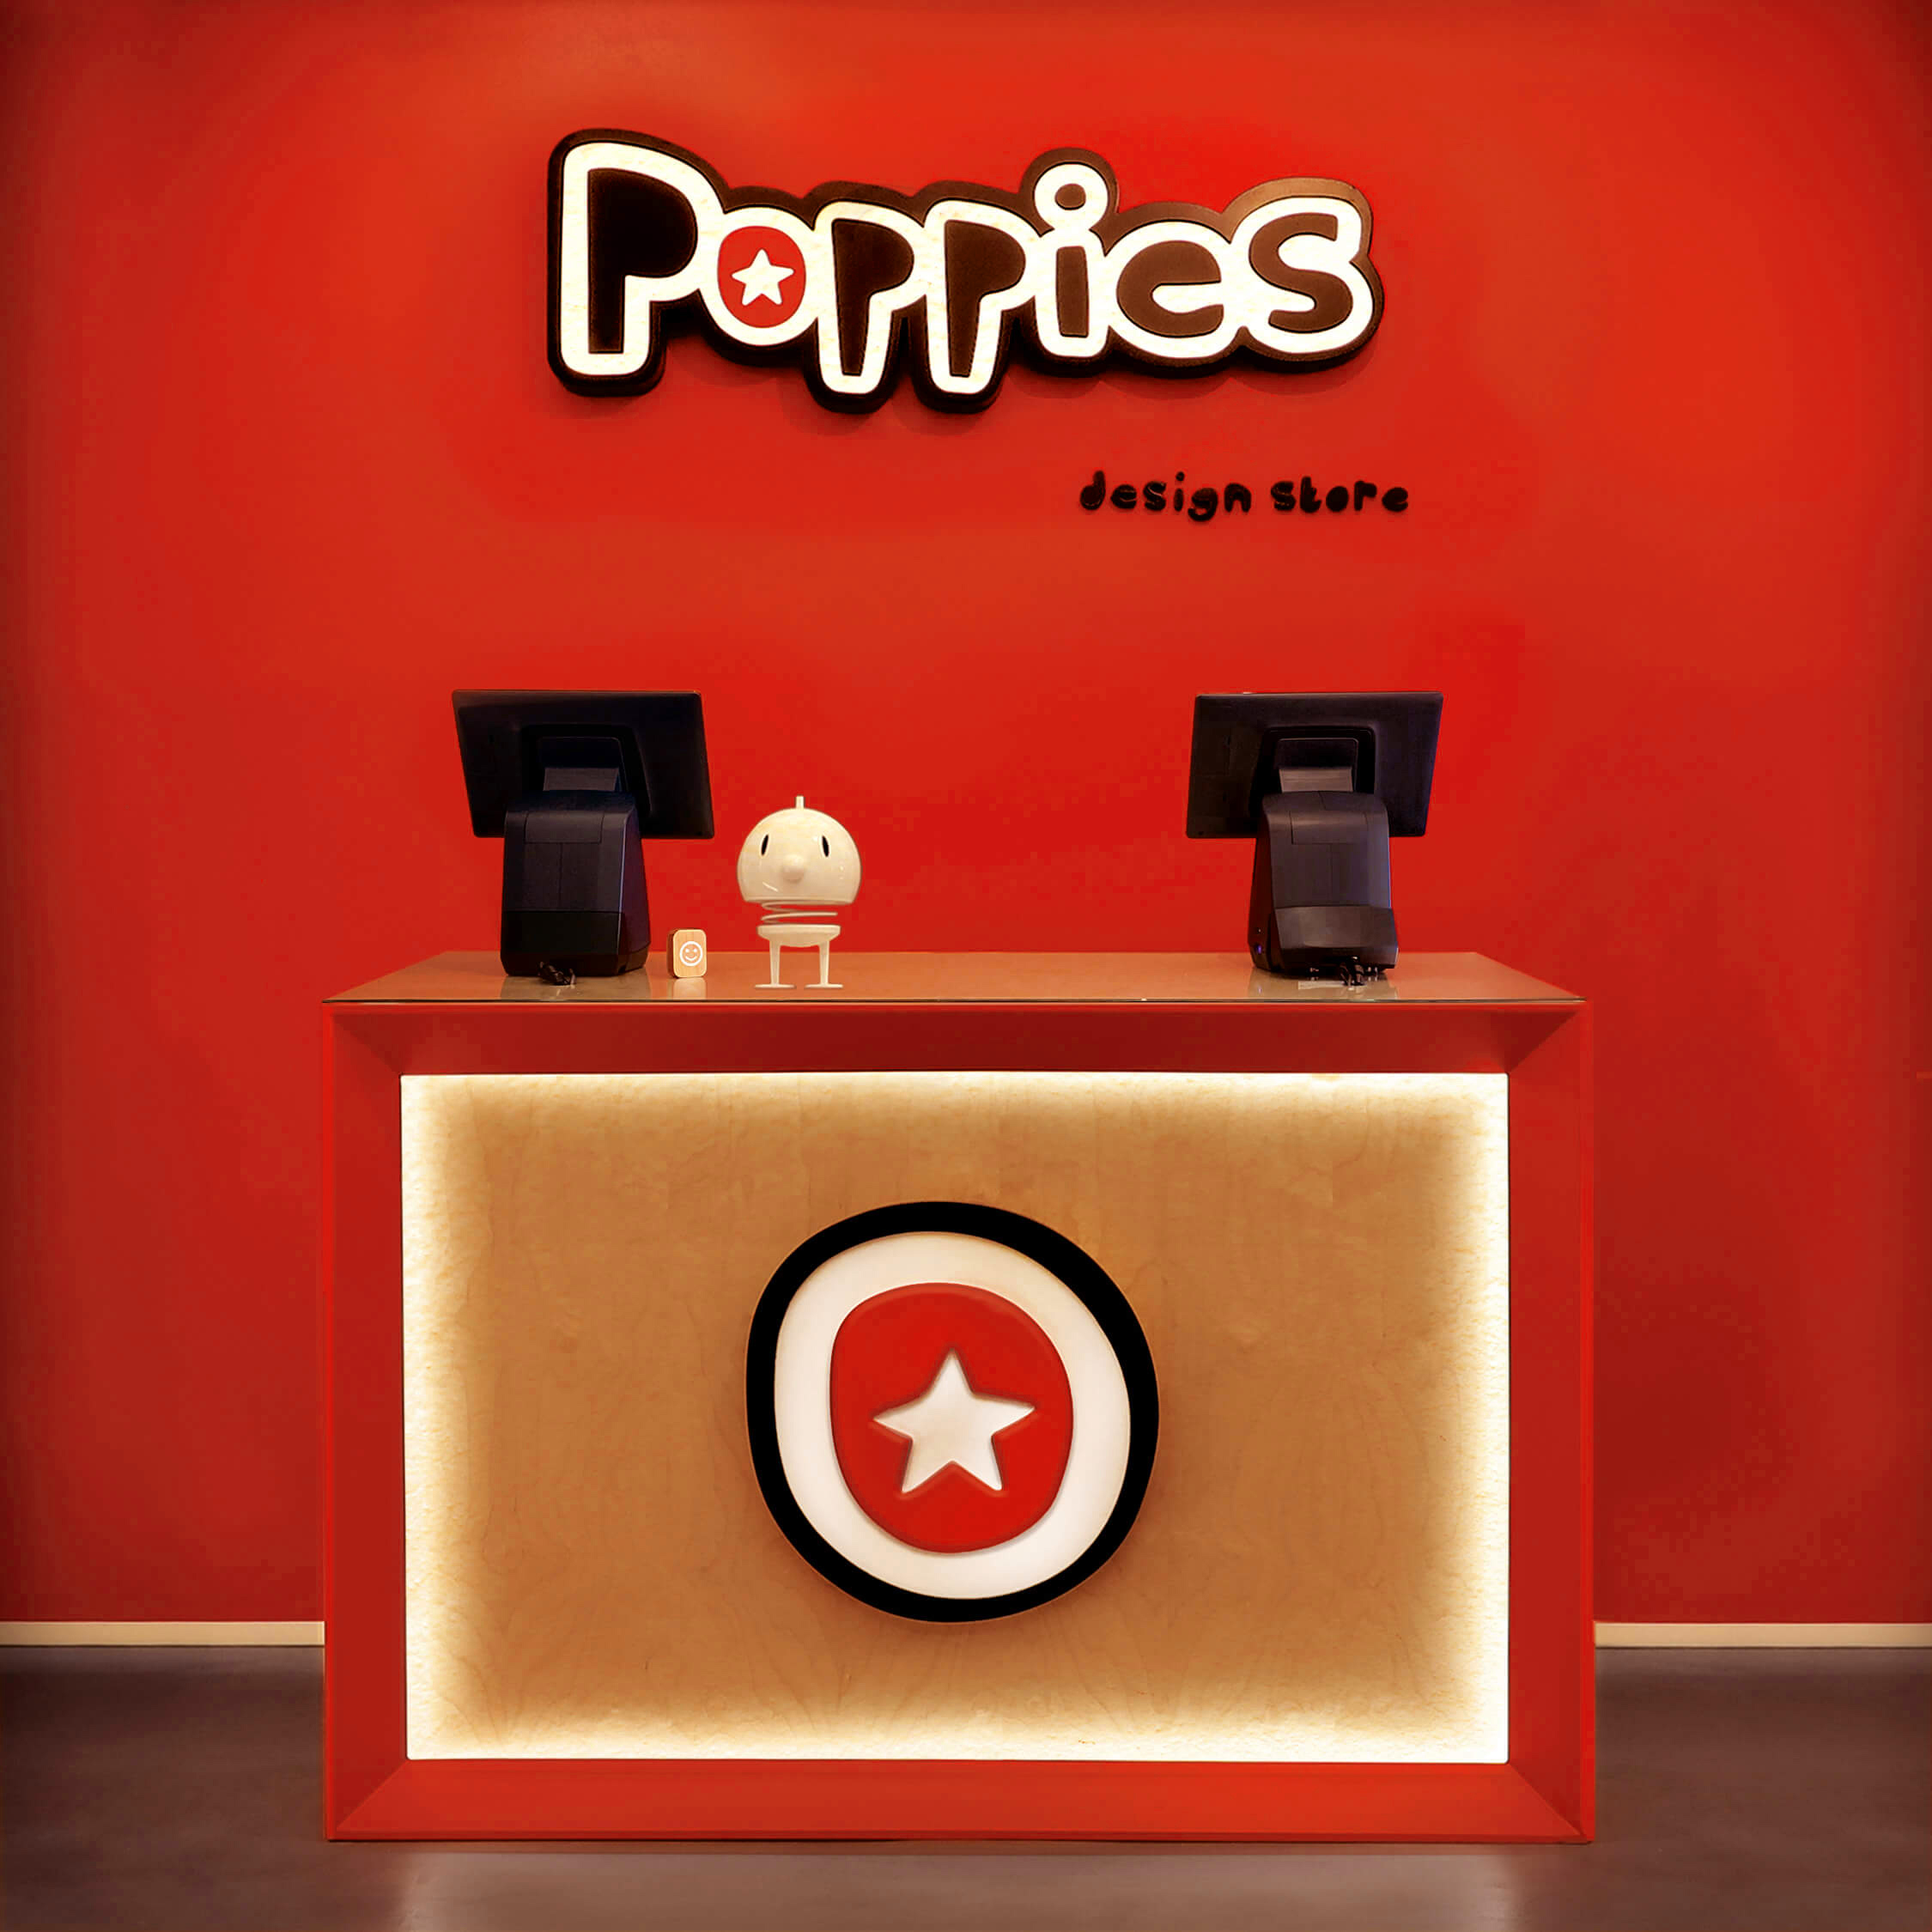 poppies-design-store-counter